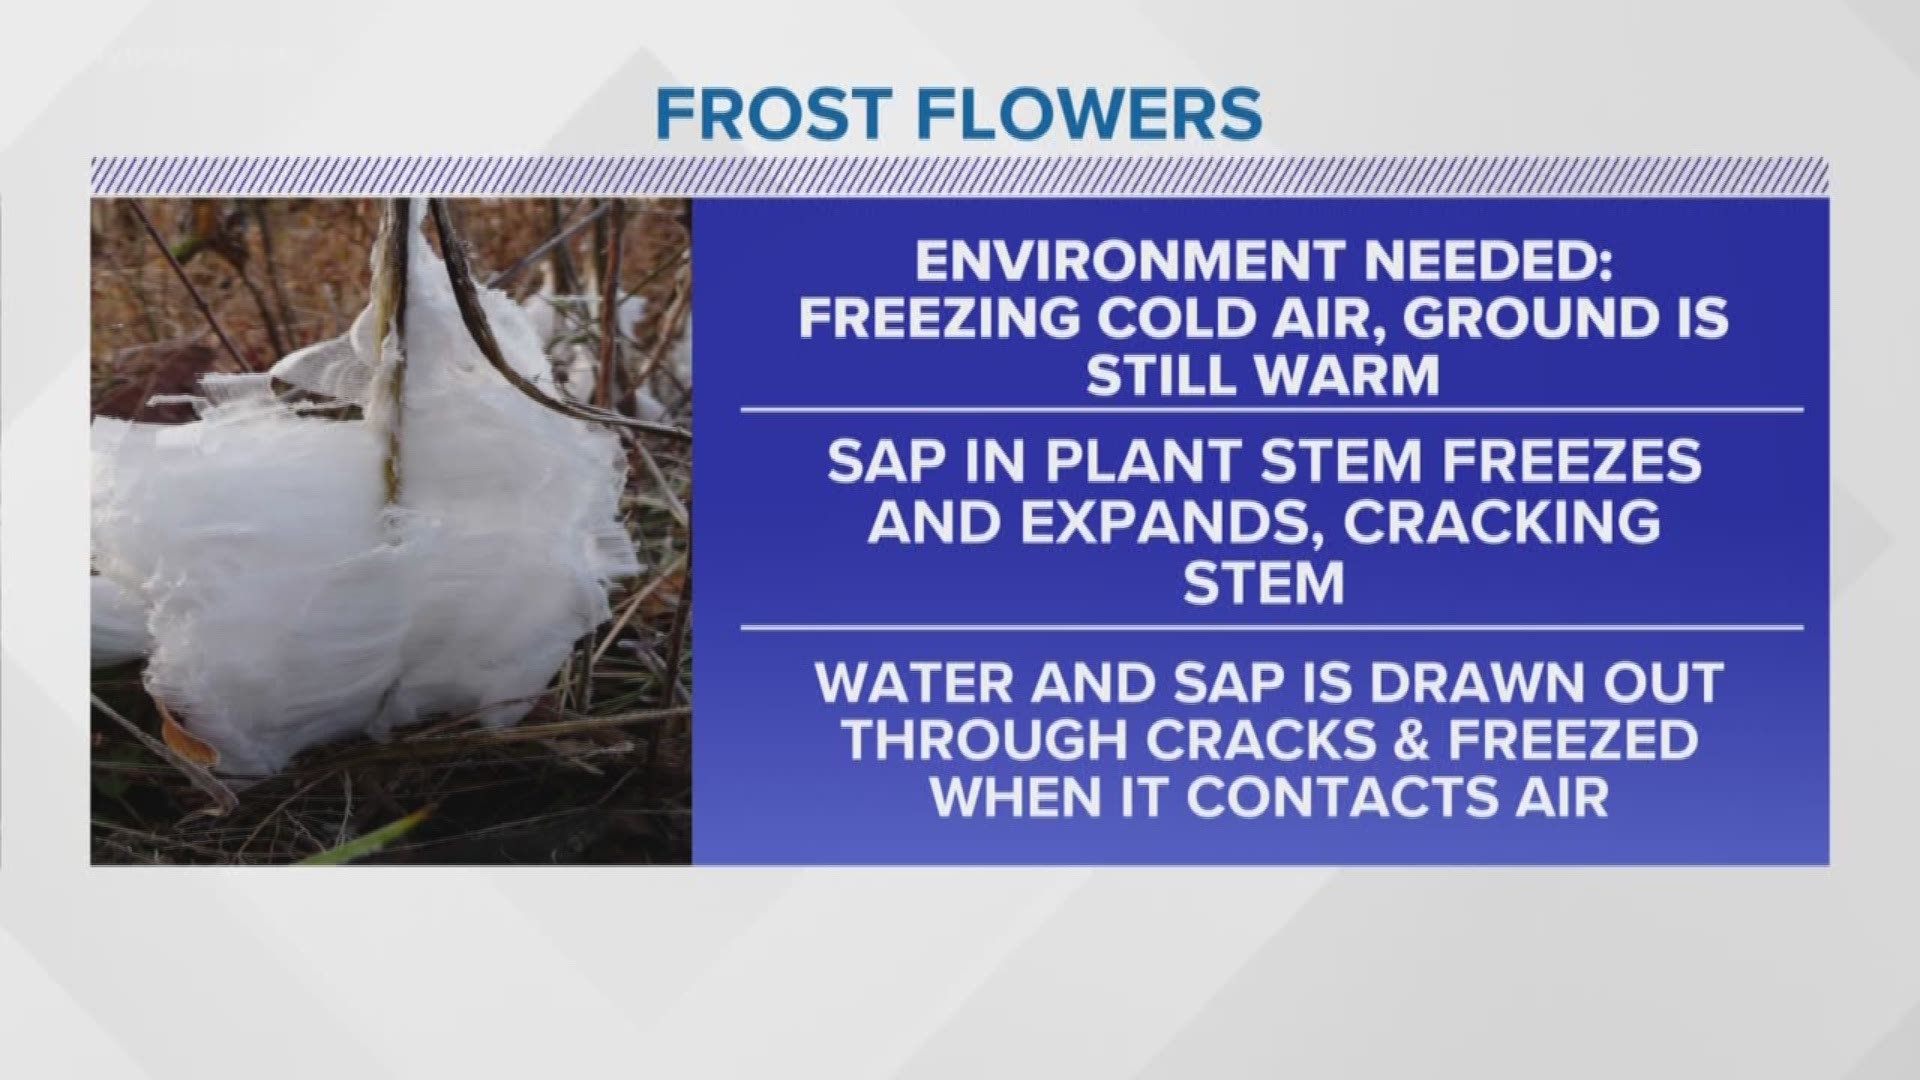 They look like beautiful winter decorations adorning your yard. Really, they're 'frost flowers,' a weather phenomenon affecting trees.